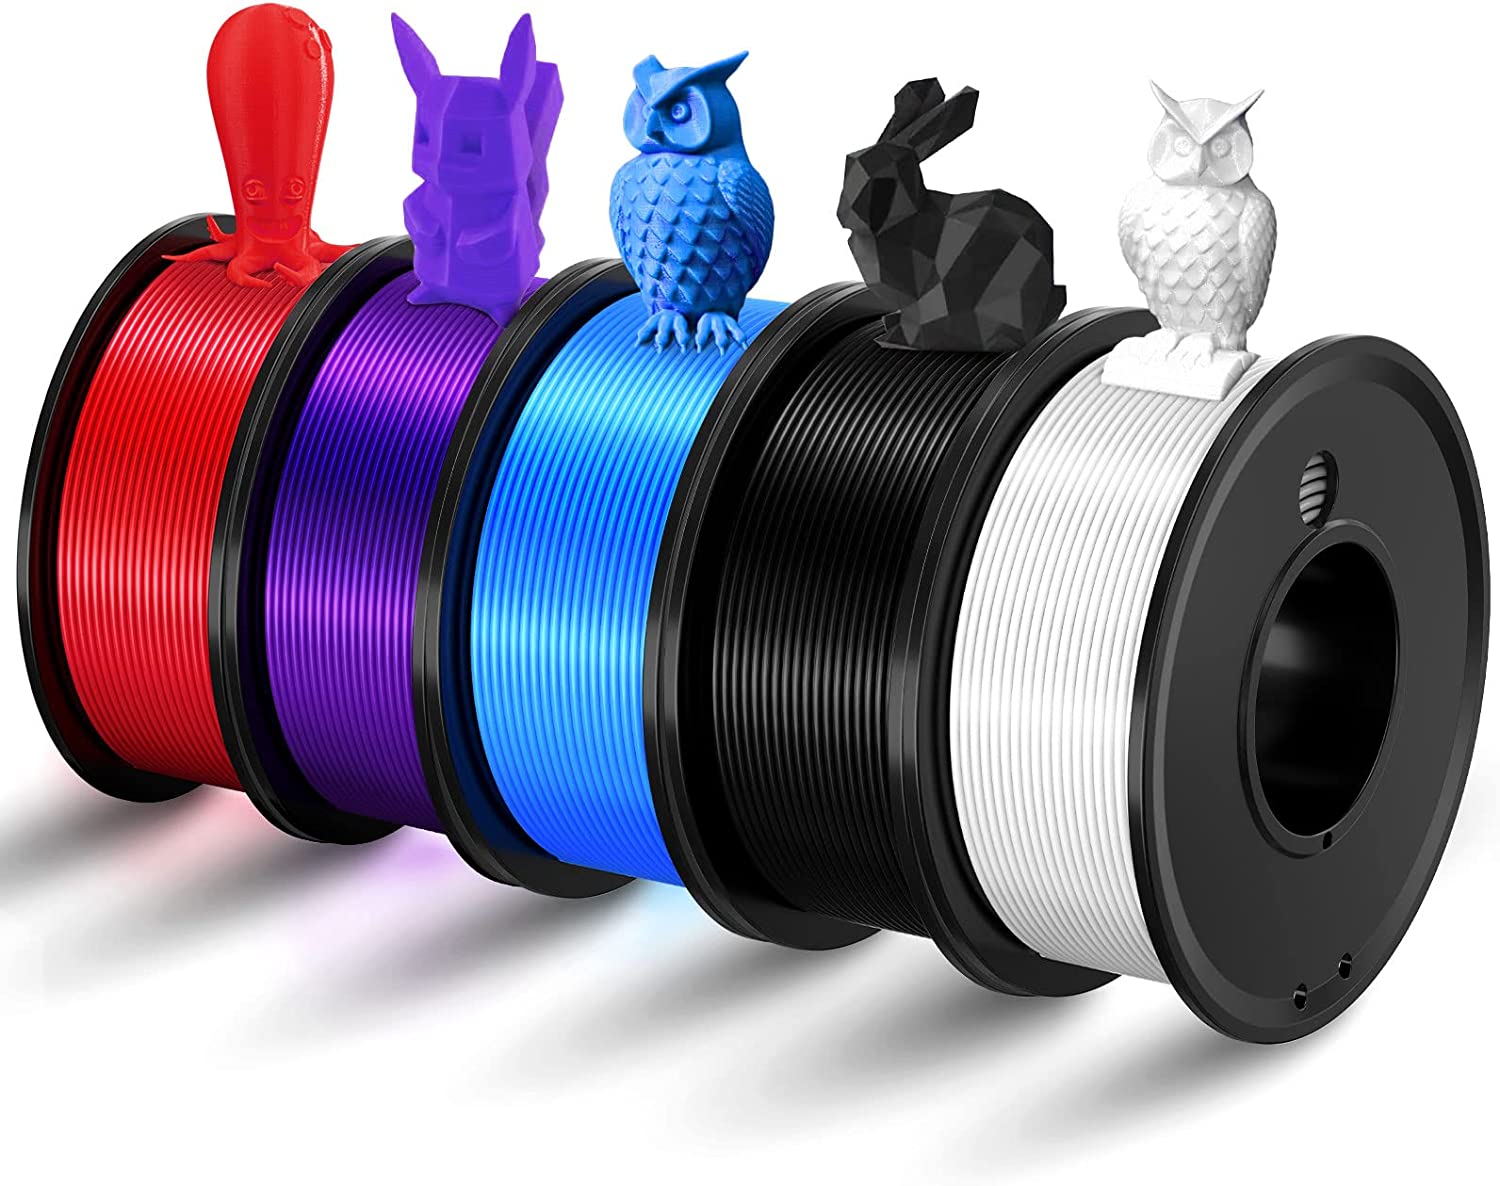 PLA vs ABS vs PETG: When to choose which 3D Printing Filament?